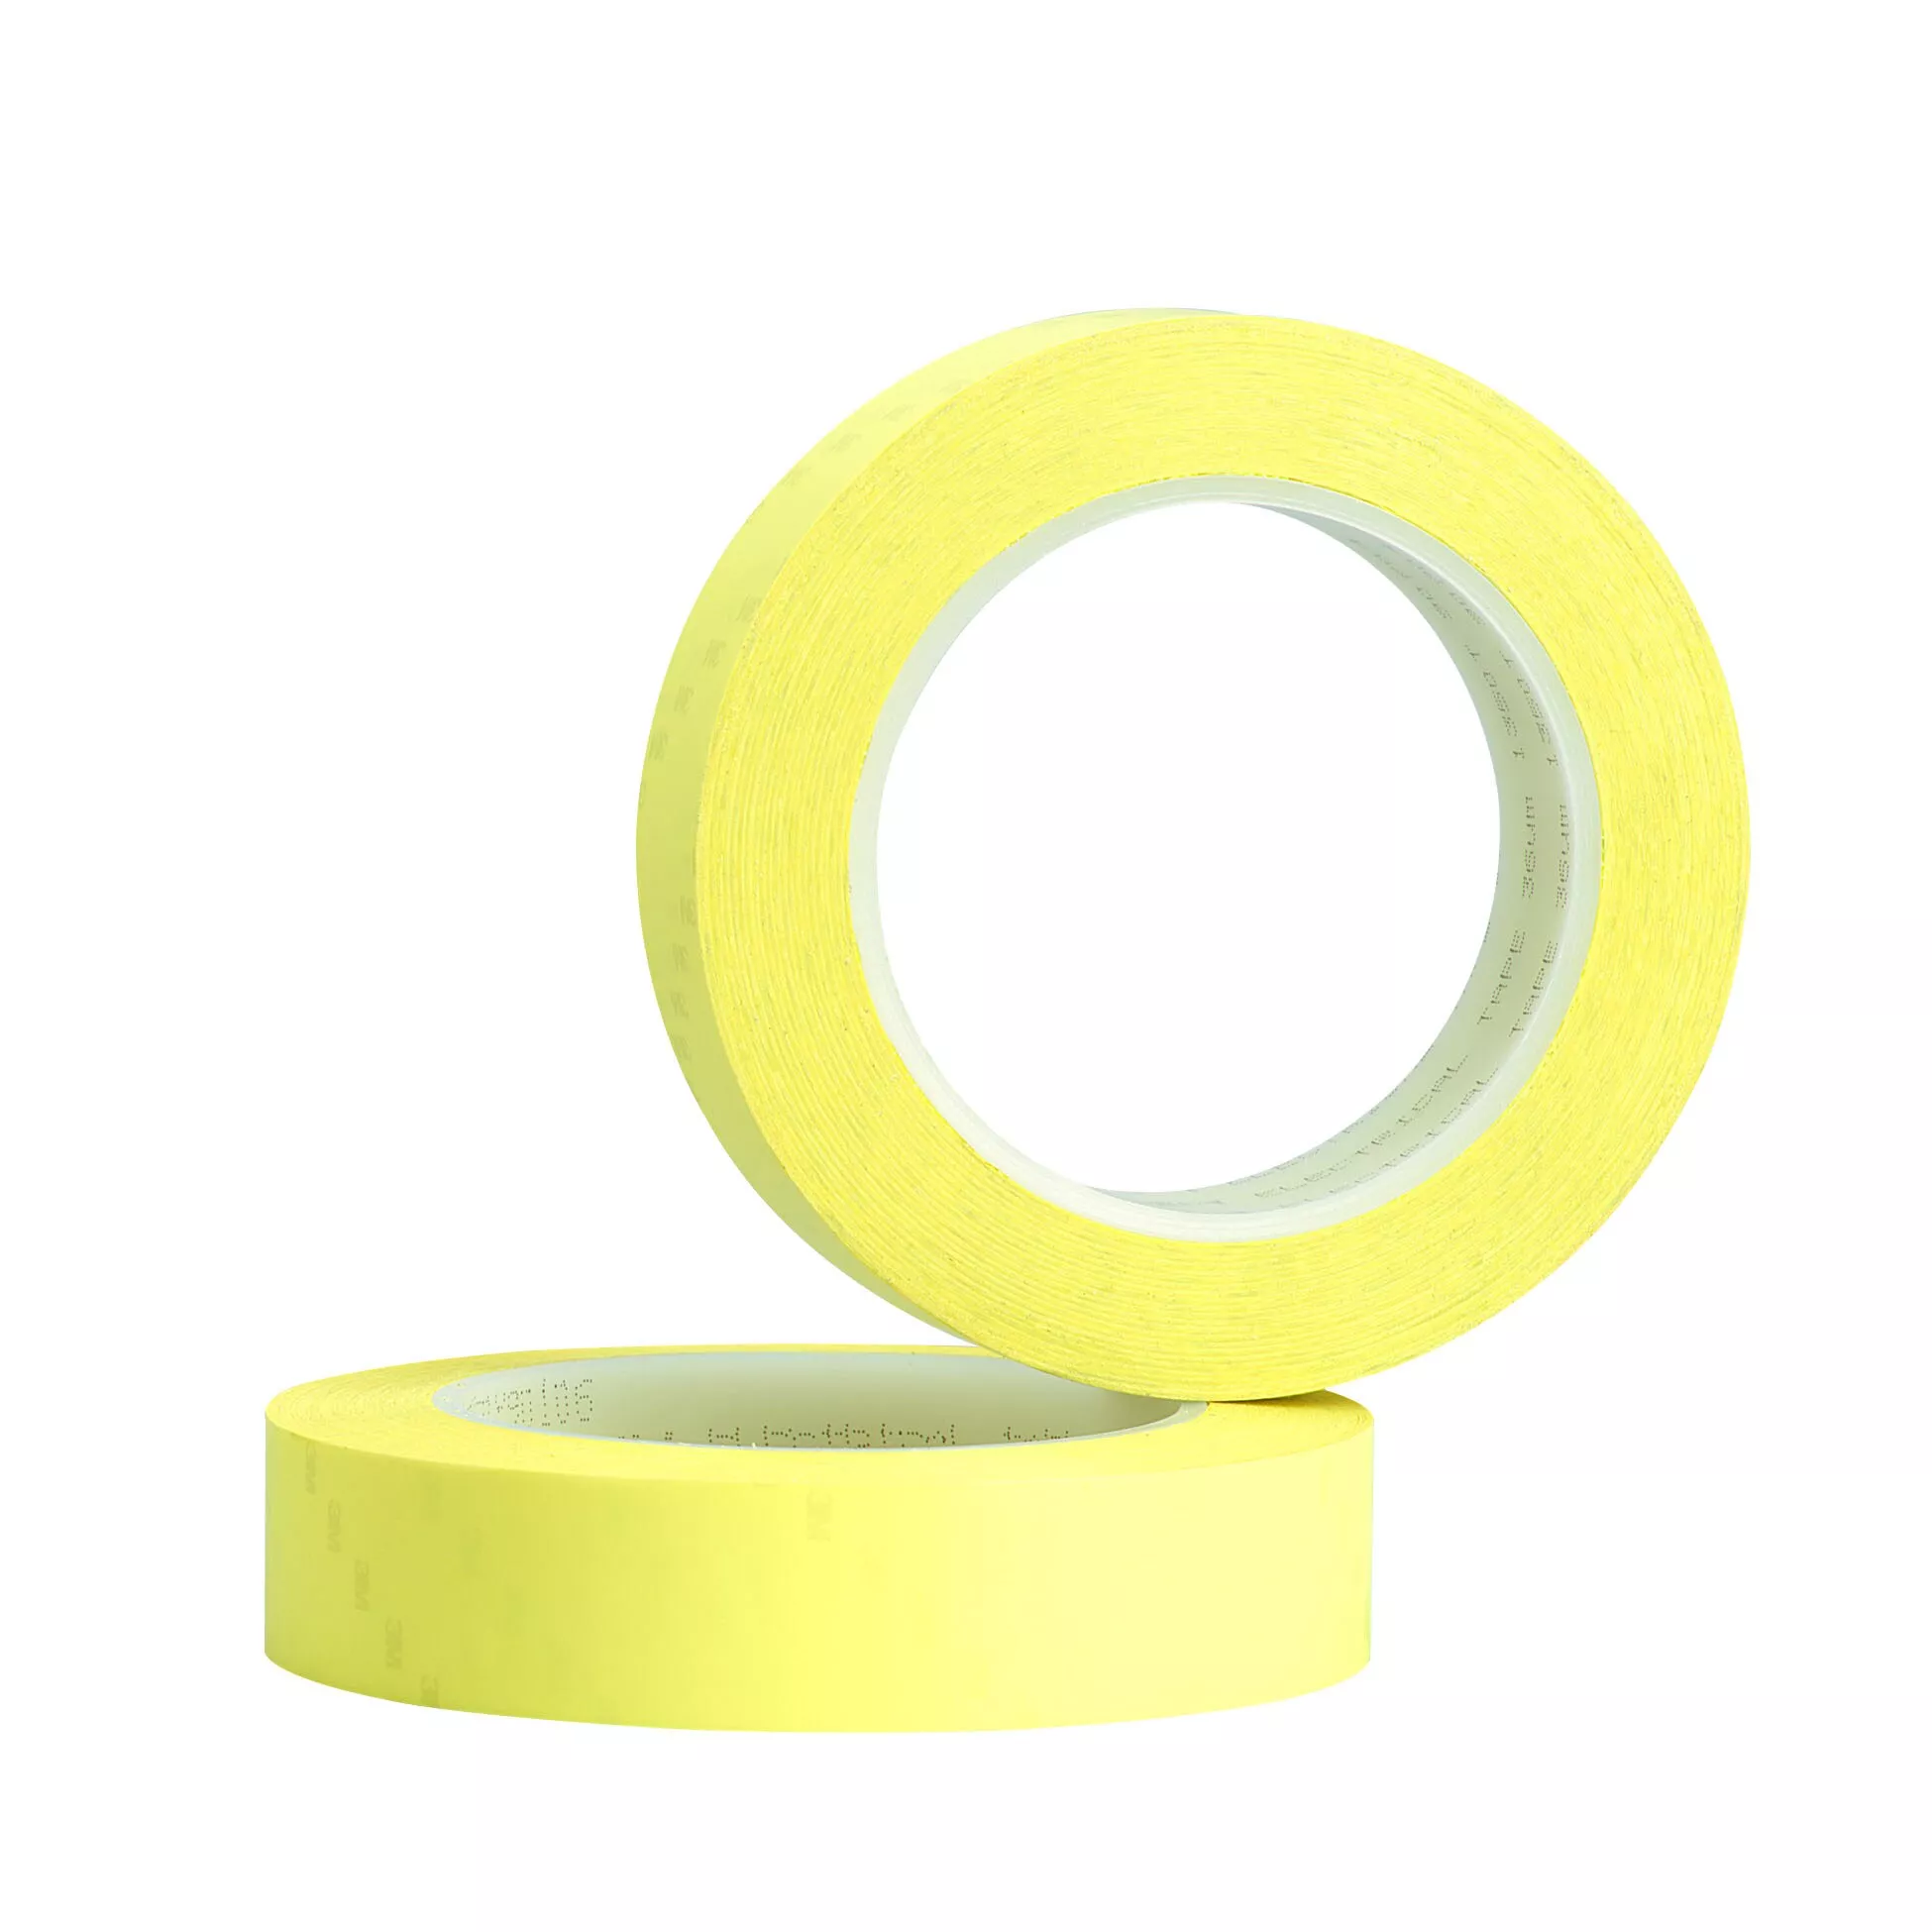 SKU 7010045329 | 3M™ Polyester Film Electrical Tape 74